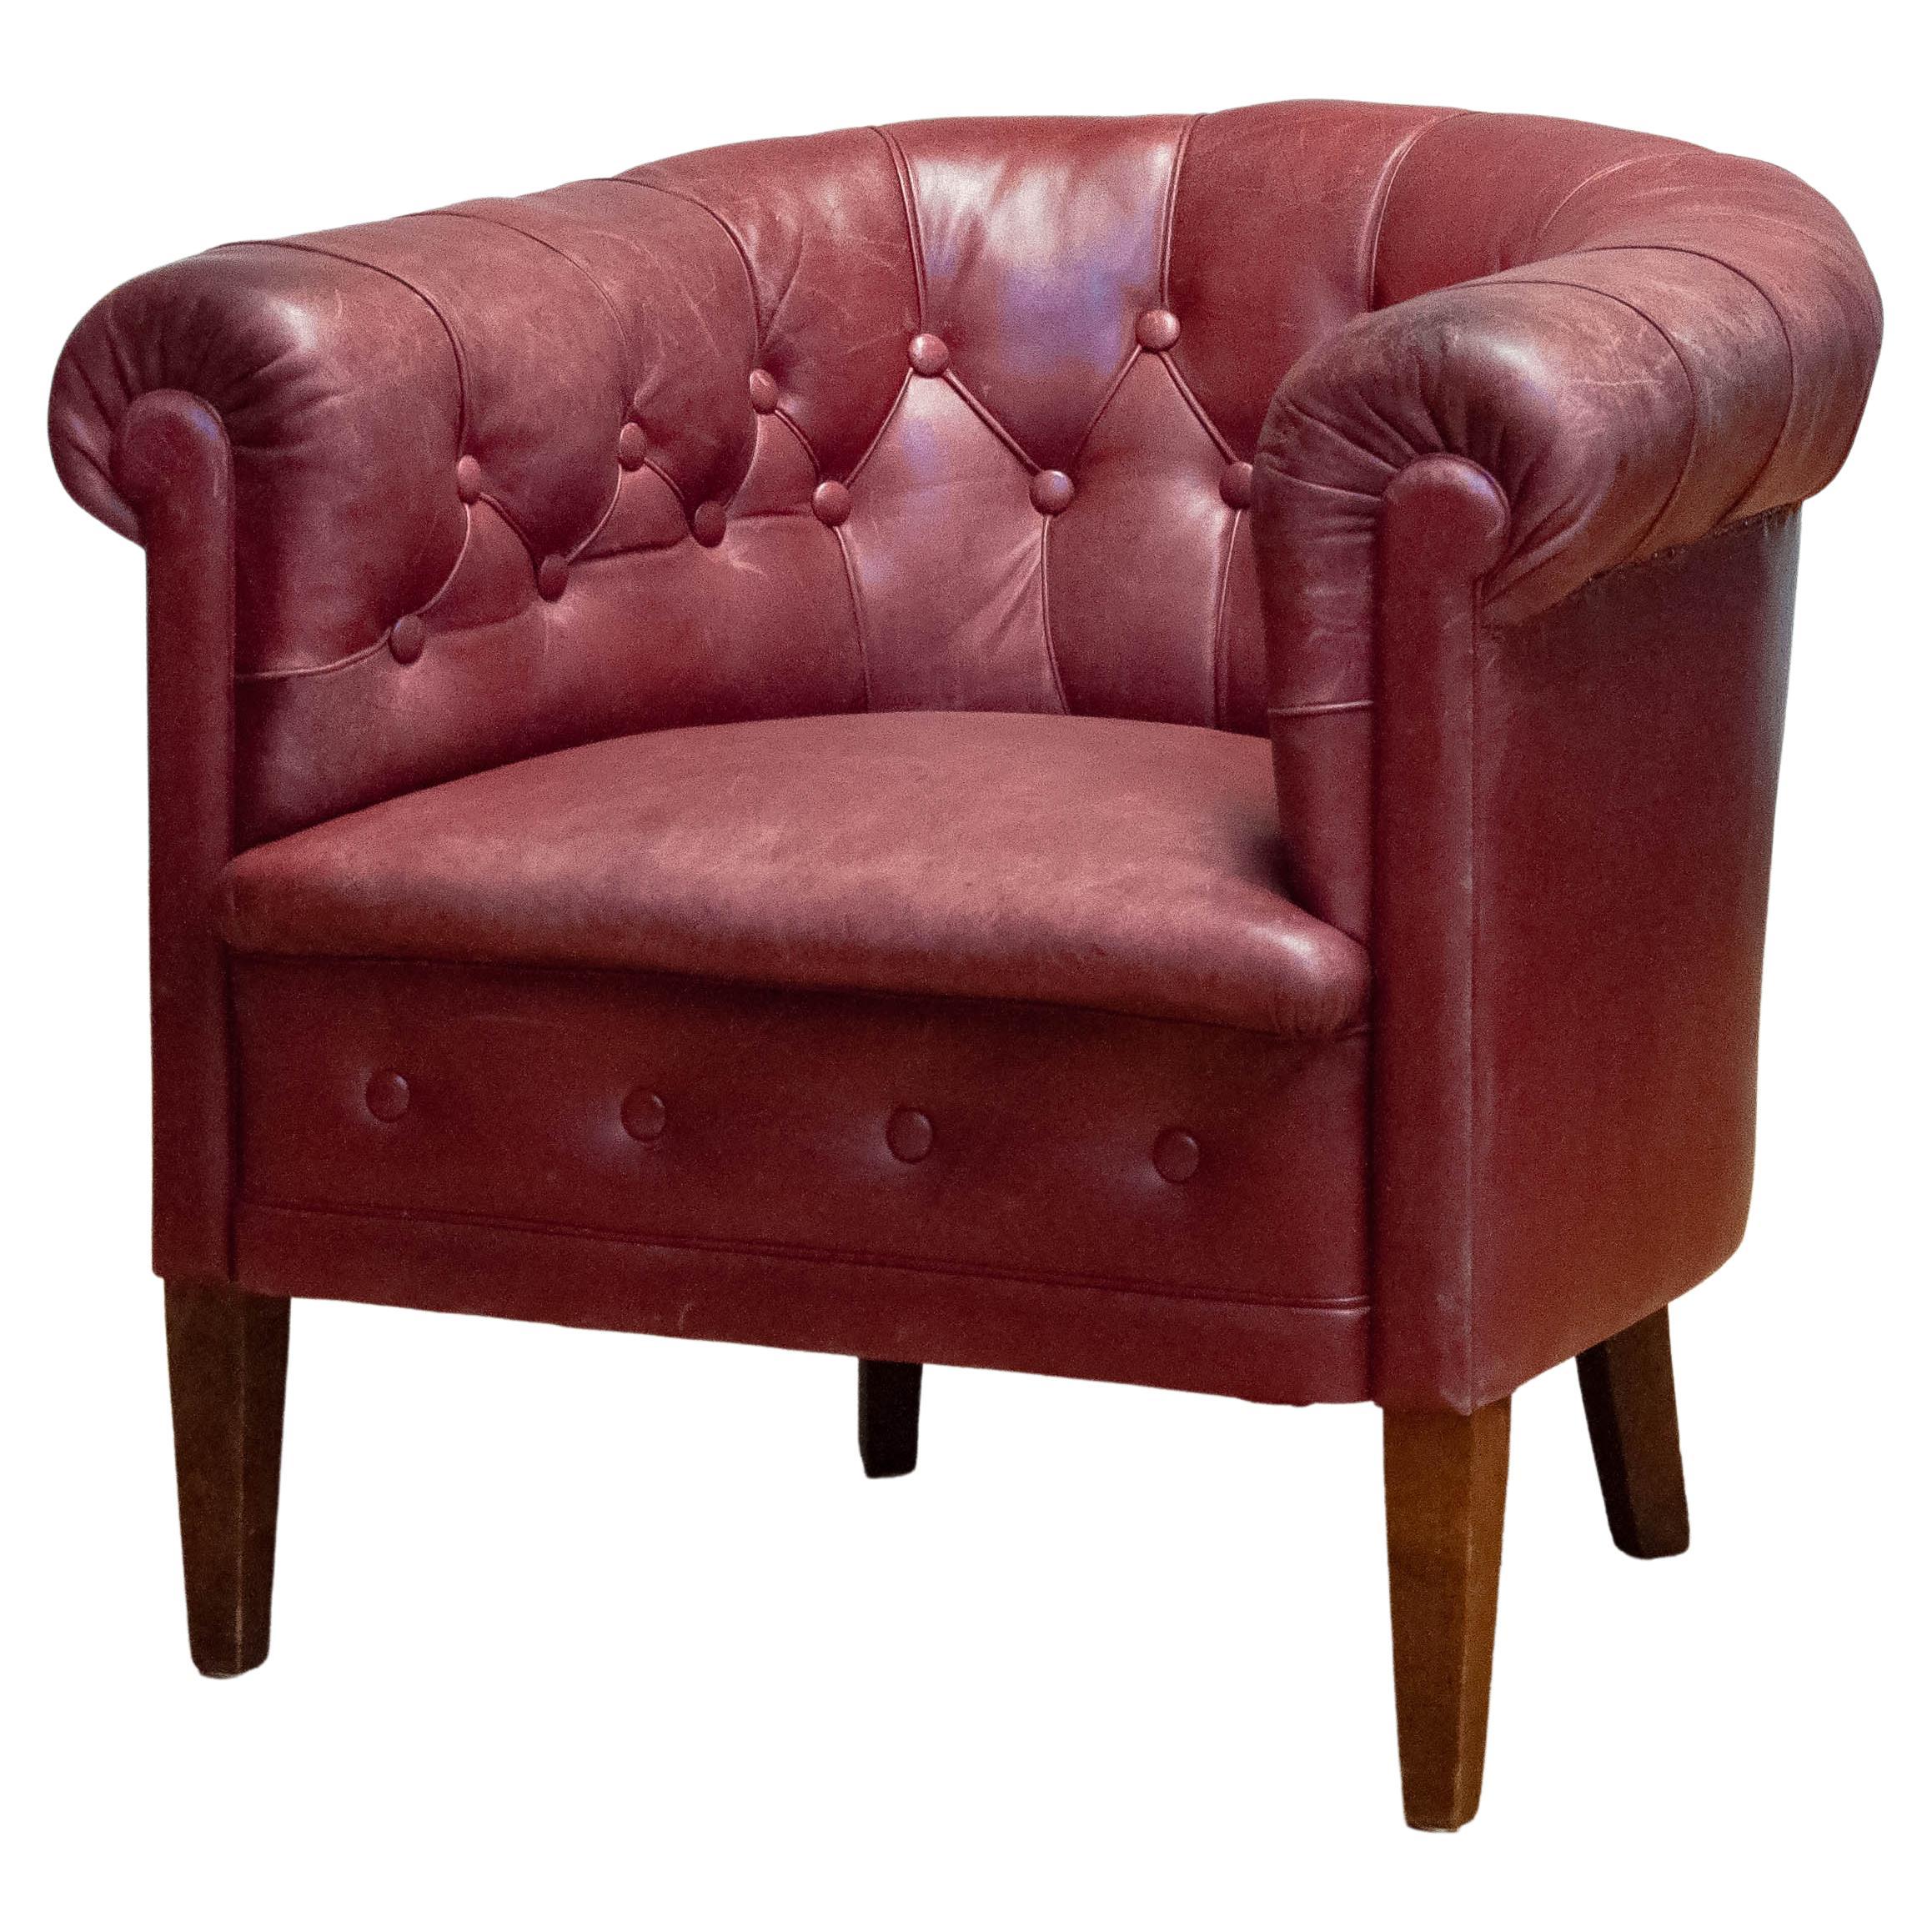 1930s Swedish Crimson Red Chesterfield Club / Lounge Chair in Patinated Leather For Sale